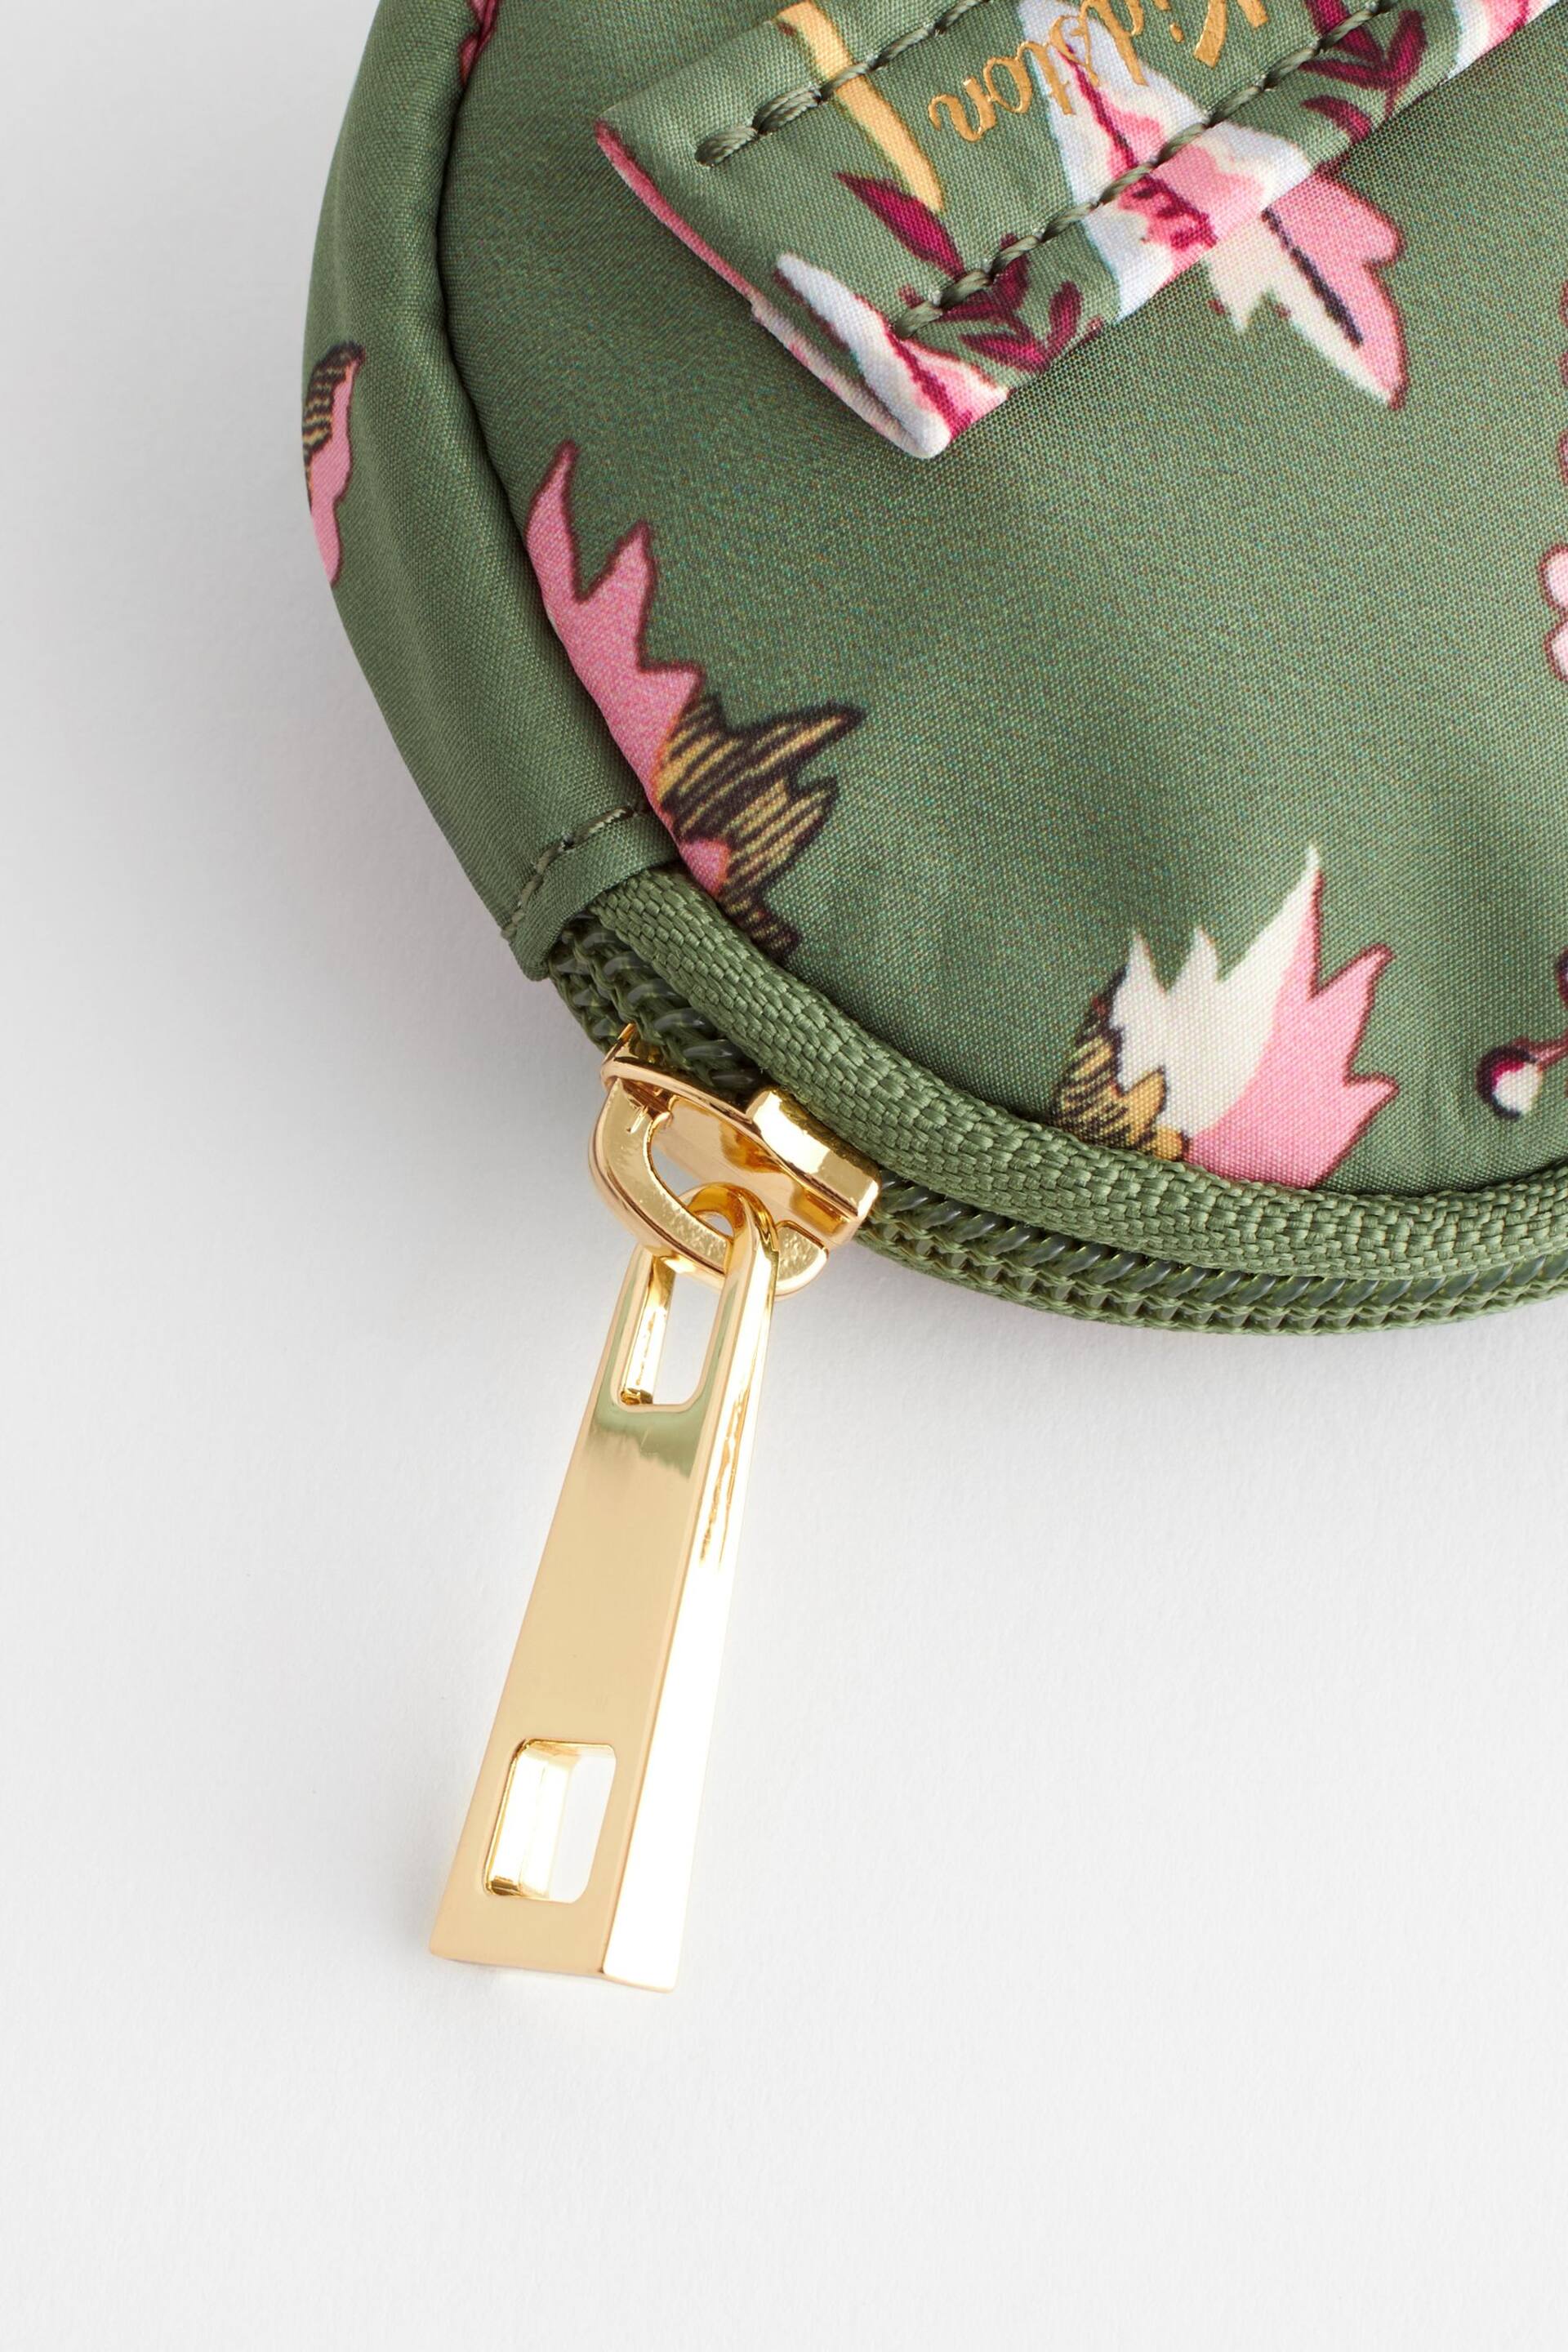 Cath Kidston Green Floral Round Coin Purse - Image 4 of 5